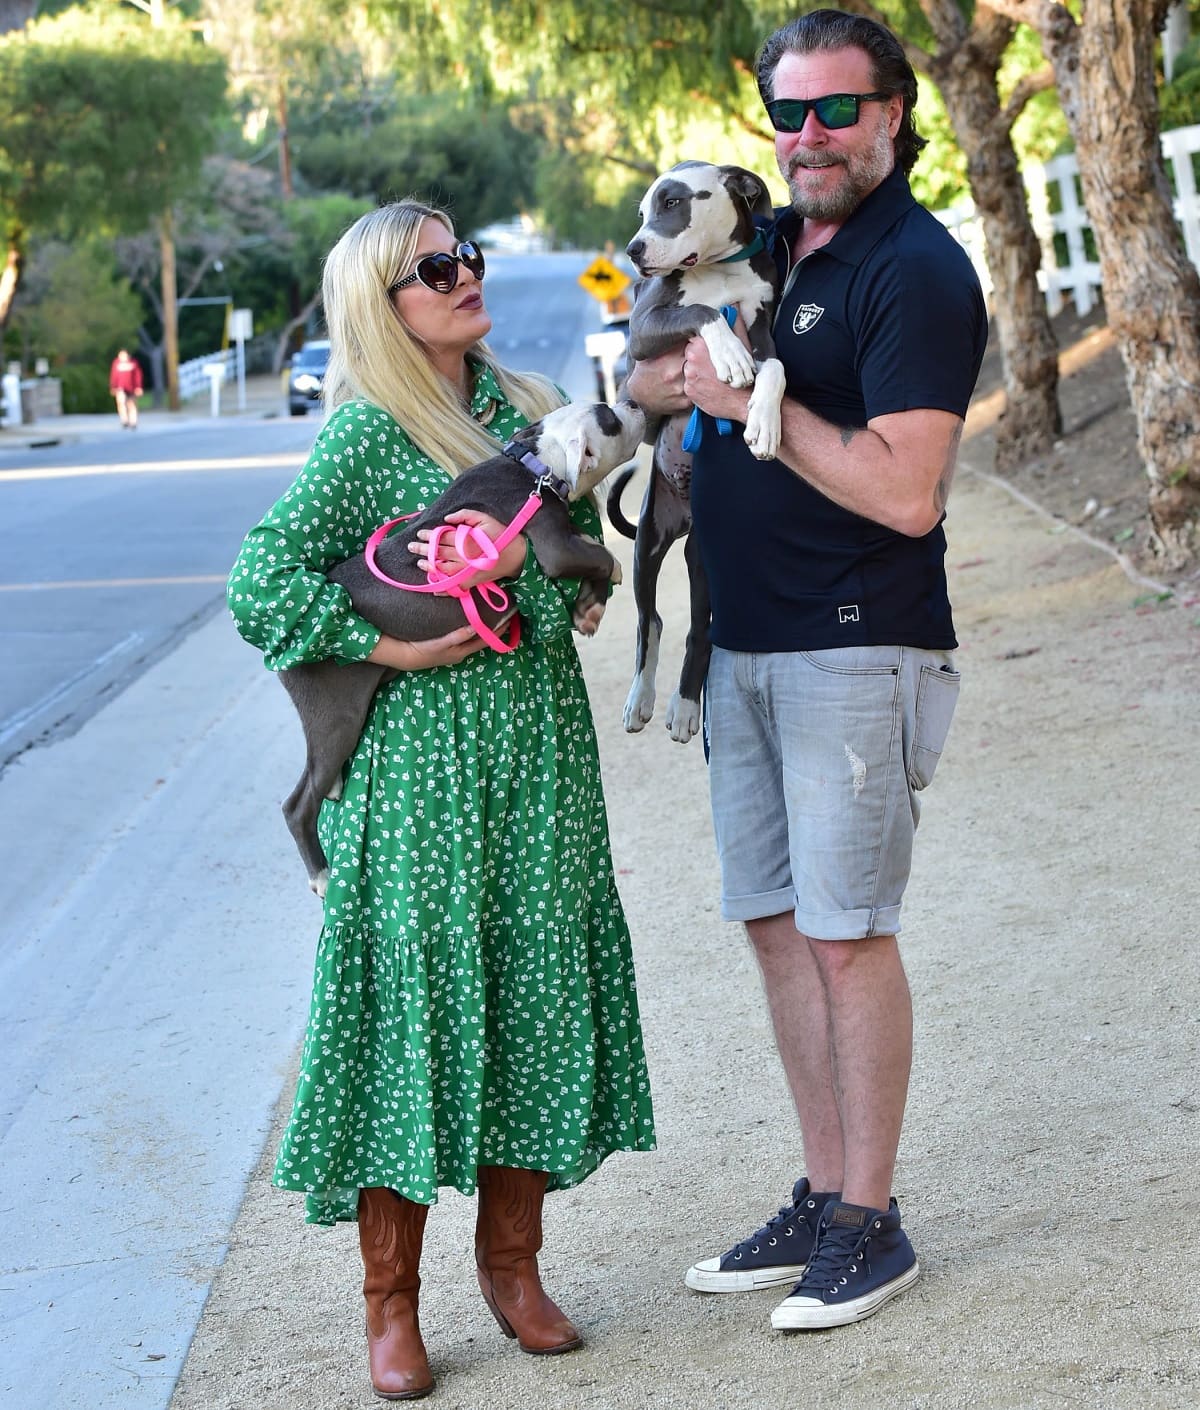 Tori Spelling and Dean McDermott taking a walk with their two dogs in Los Angeles